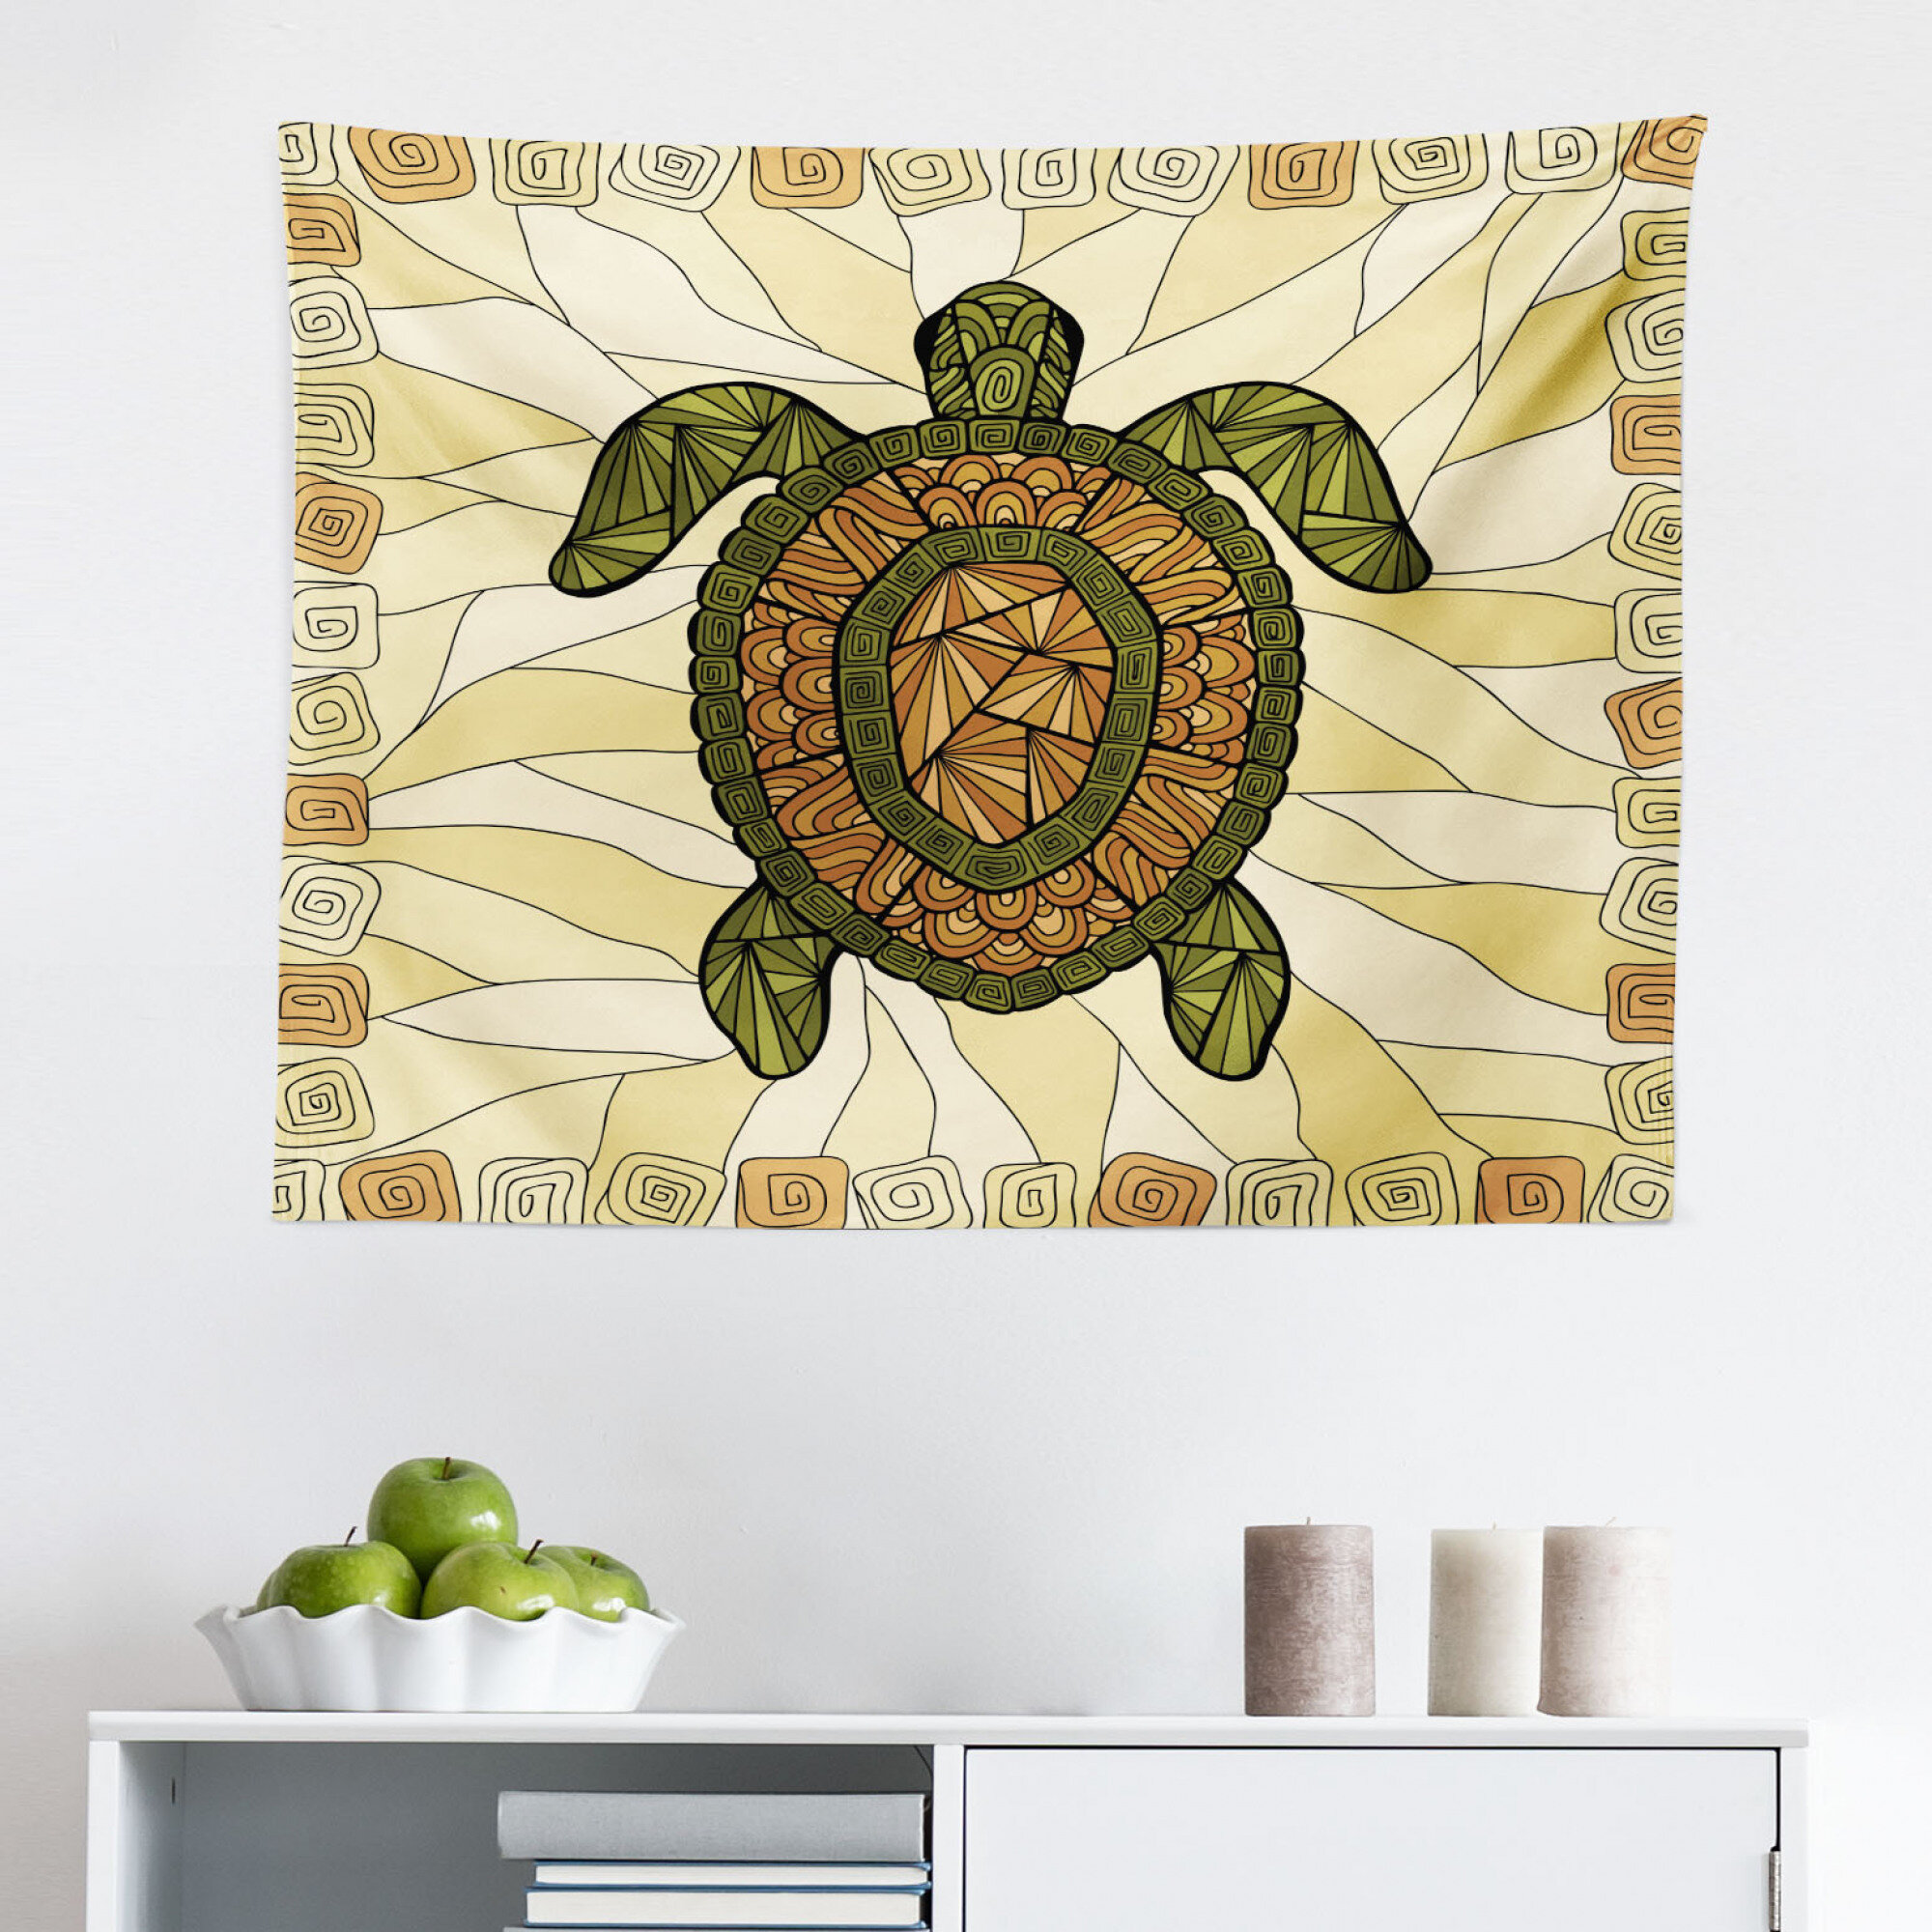 Ambesonne Turtle Tapestry, Turtle Zentangle On Yellow Background Spiral  Forms Bohemian Art, Fabric Wall Hanging Decor For Bedroom Living Room Dorm,  